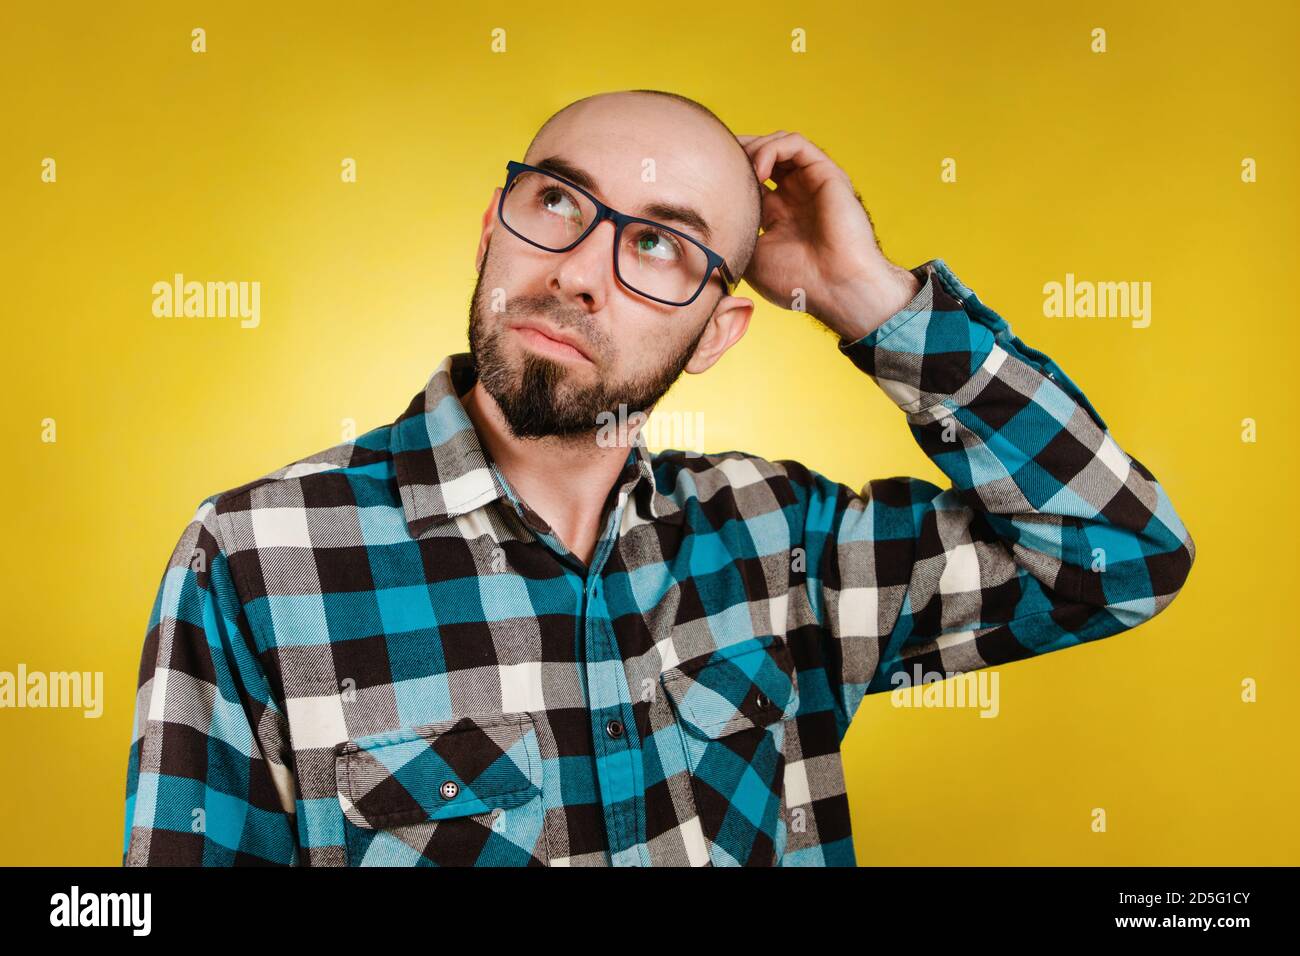 People and emotions. A bald, bearded man in glasses and a blue plaid shirt, scratching his head for a solution or an idea. Yellow background. Copy spa Stock Photo